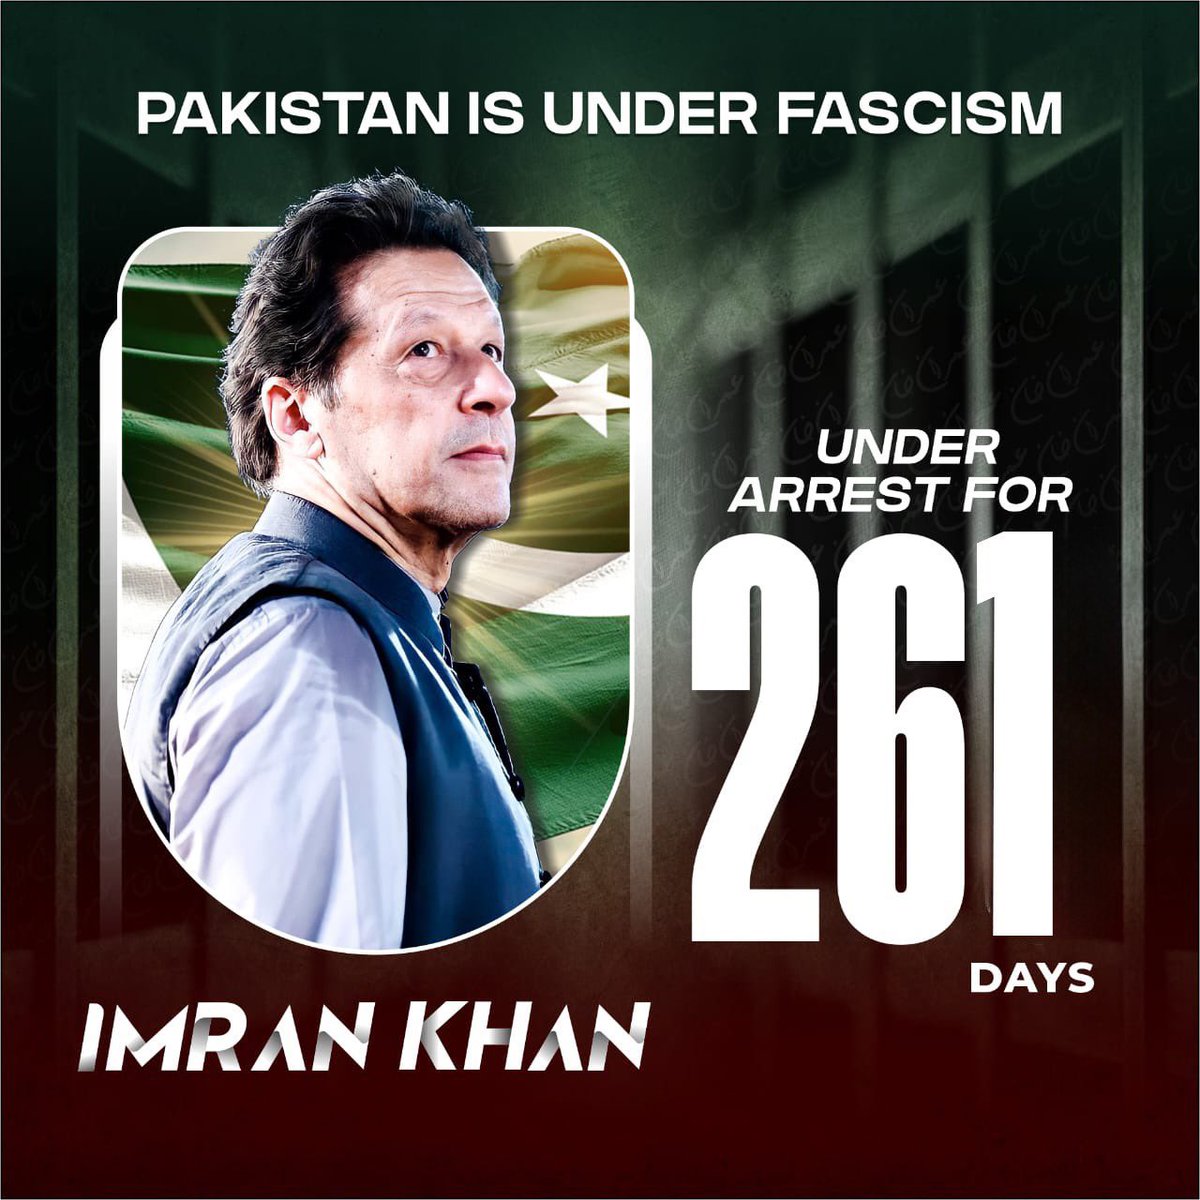 Today marks 261 days of Imran Khan's illegal imprisonment. It's disheartening to witness the silence from the international community on this grave injustice. We must raise our voices to uphold human rights and demand accountability. #ReleaseImranKhan #ووٹ_عمران_خان_کا